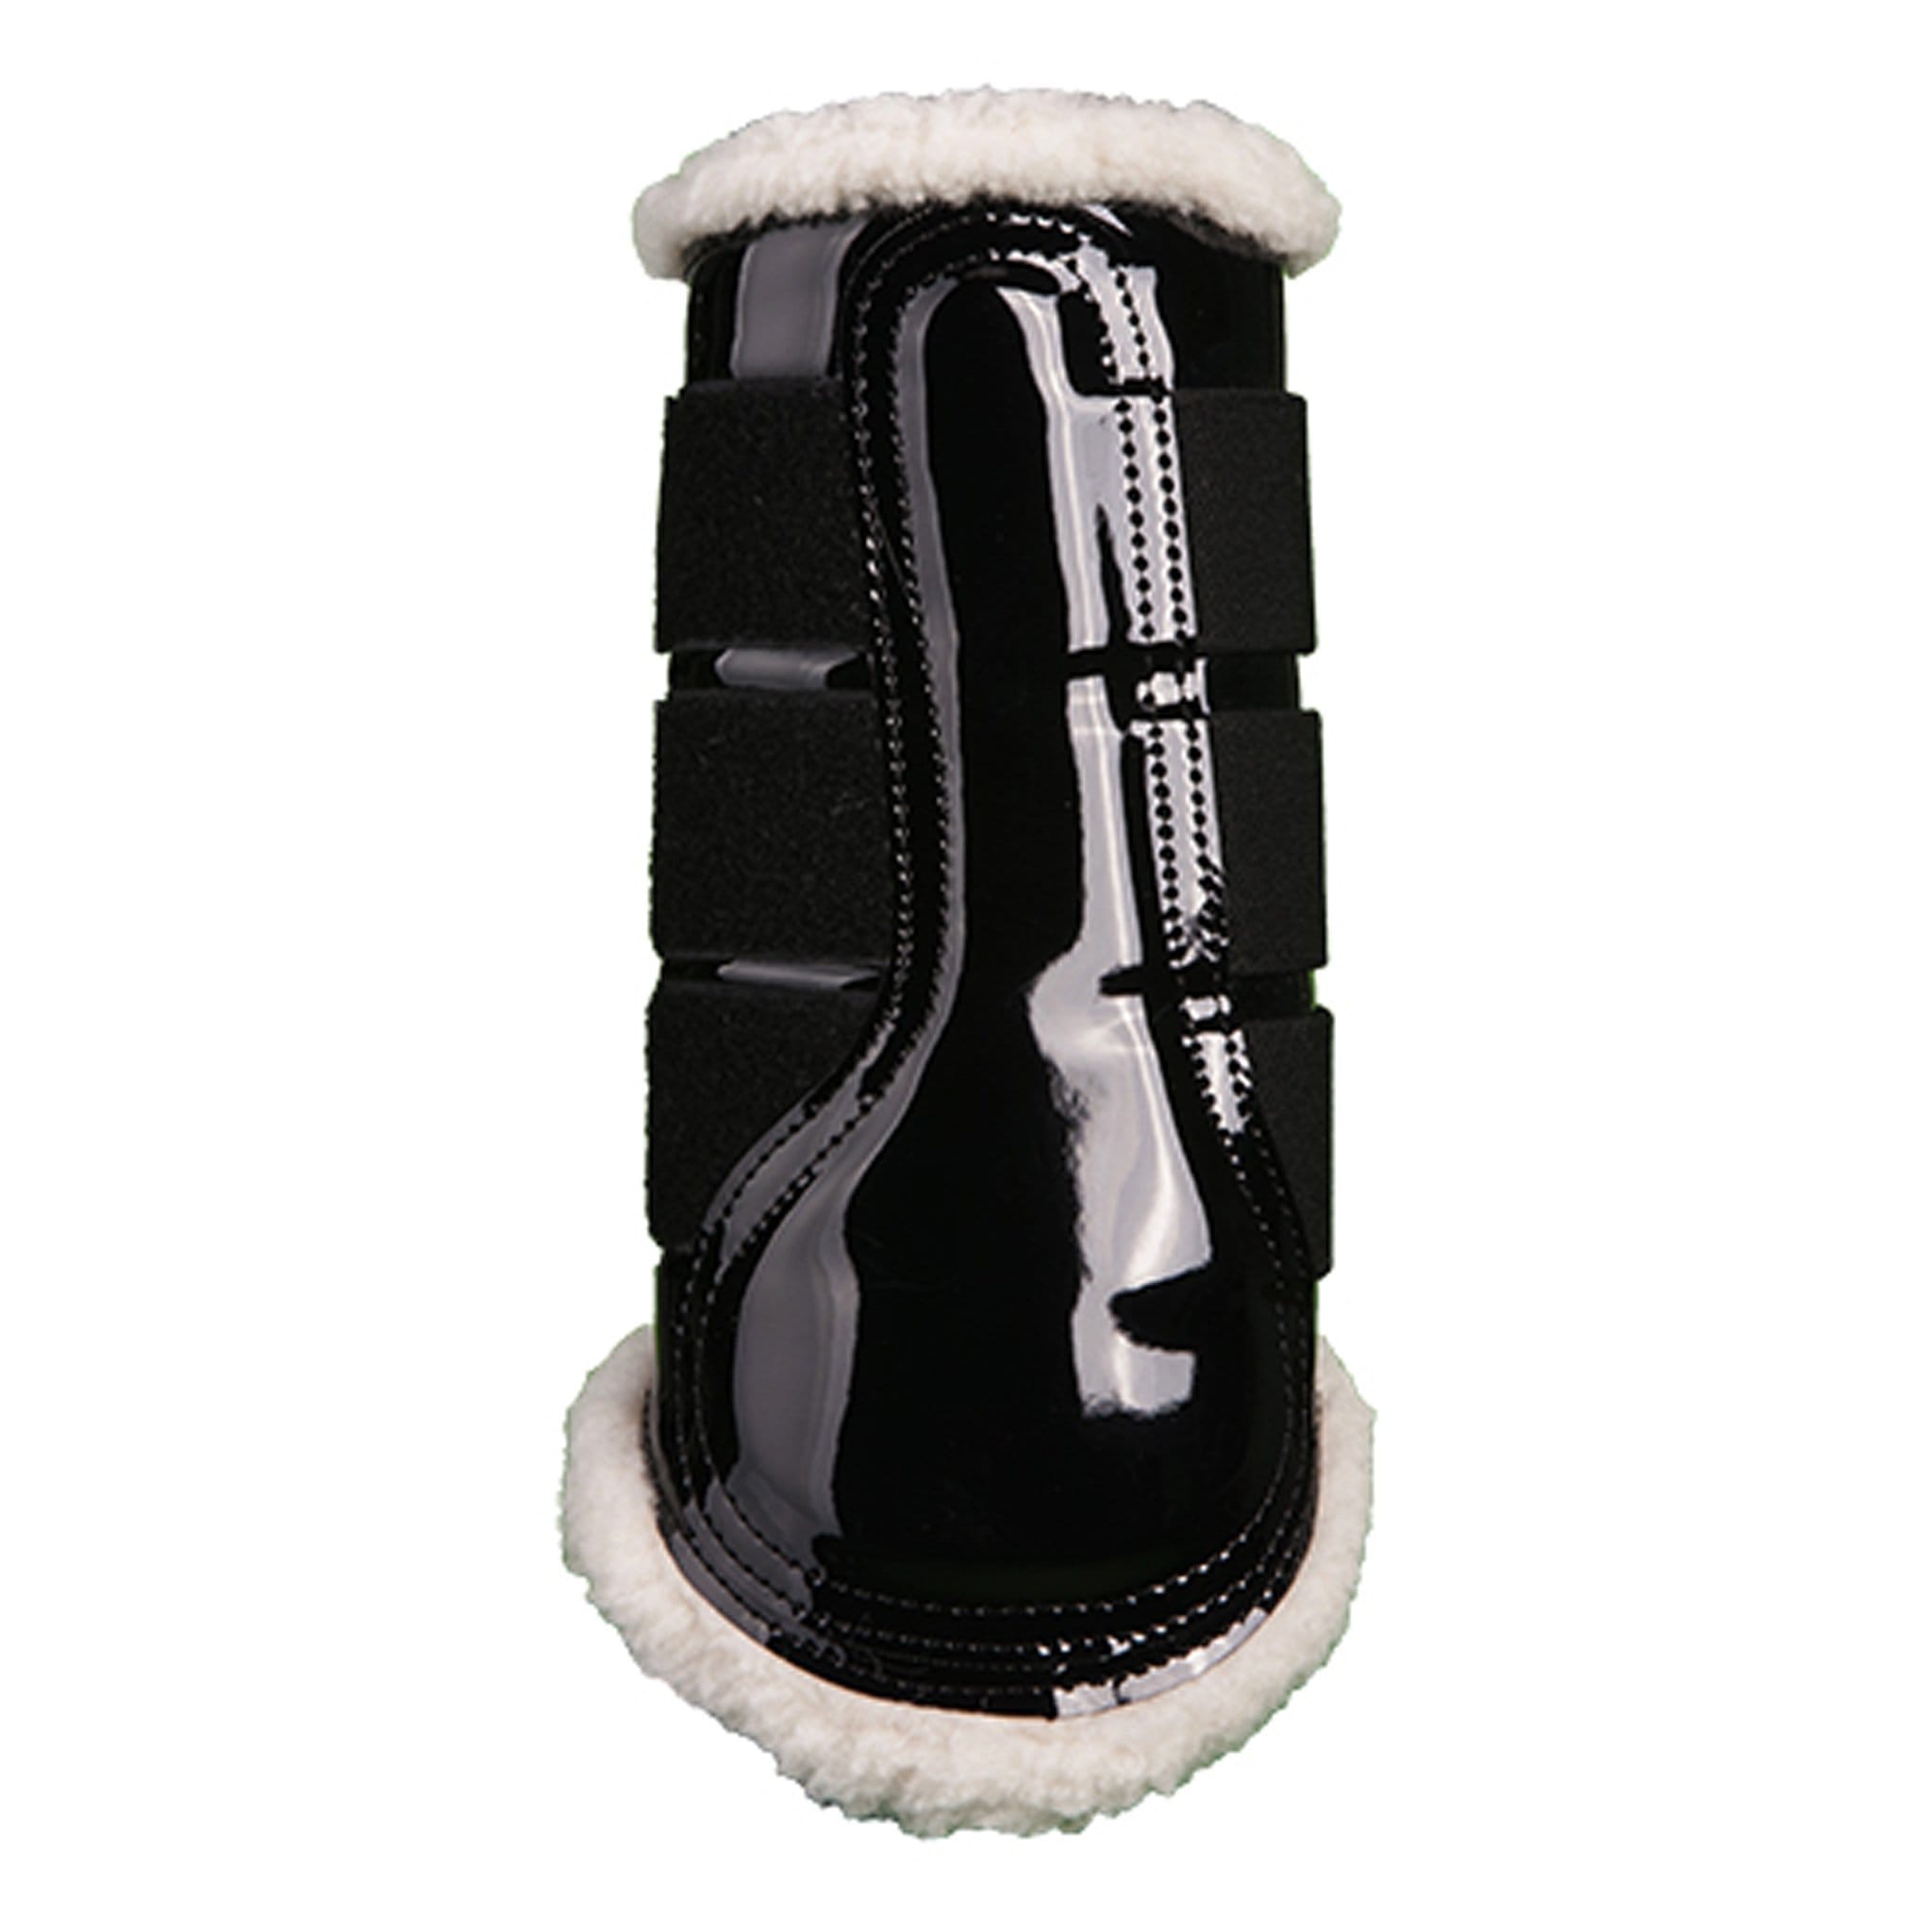 HKM Colourful Patent Comfort Brushing Boots Black 4189/9100